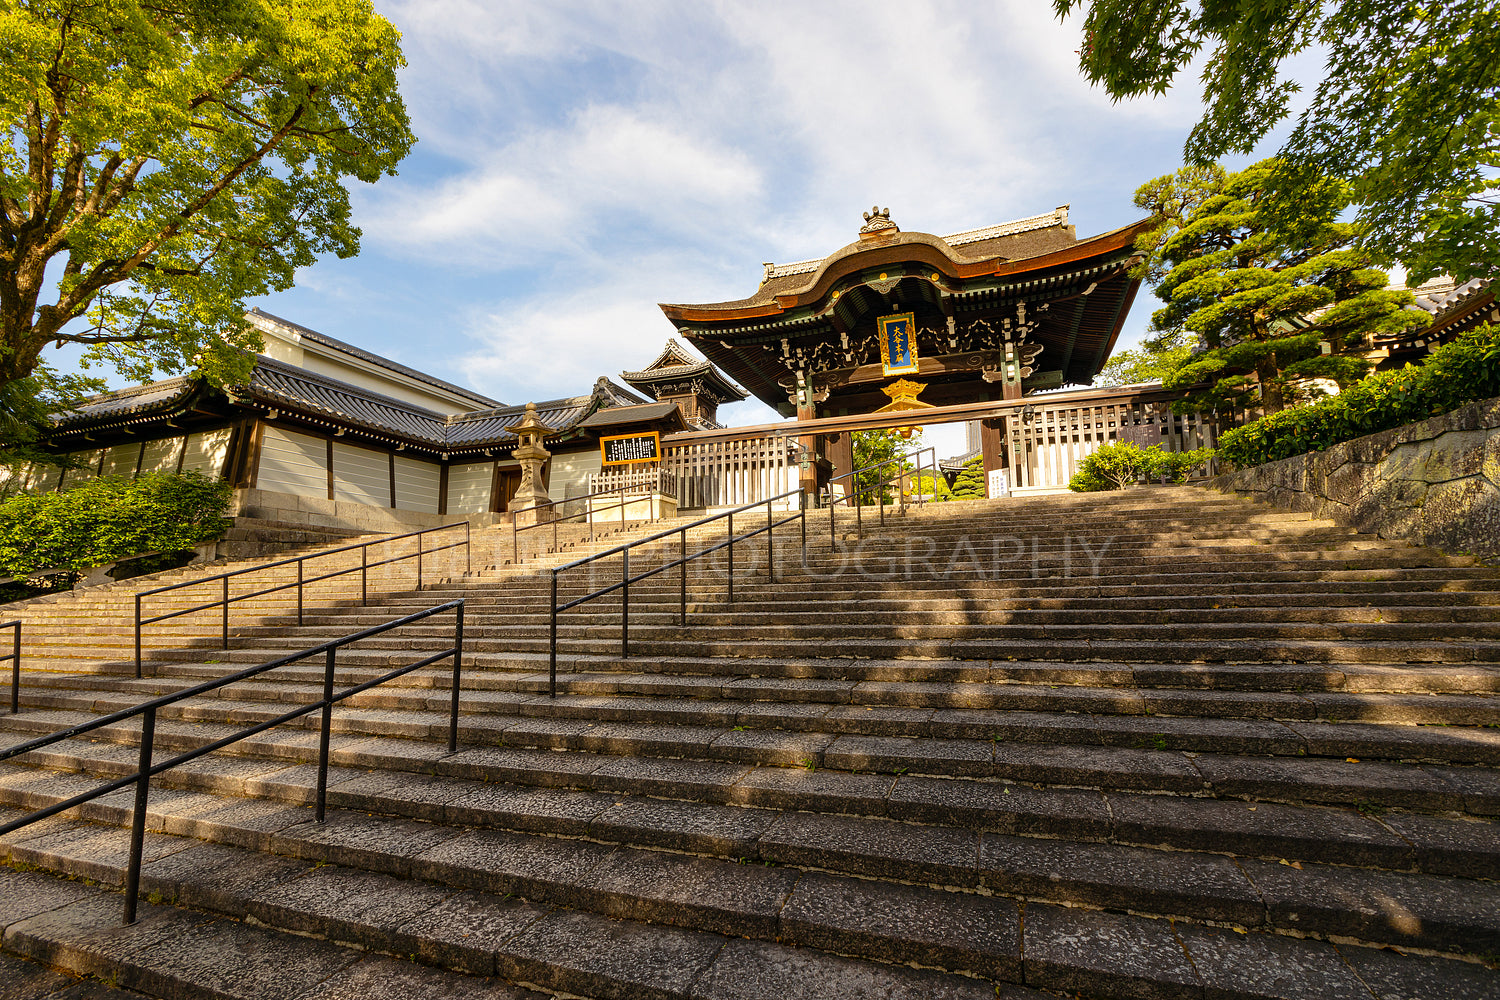 Traditional Buddhist temple in Kyoto city in Japan